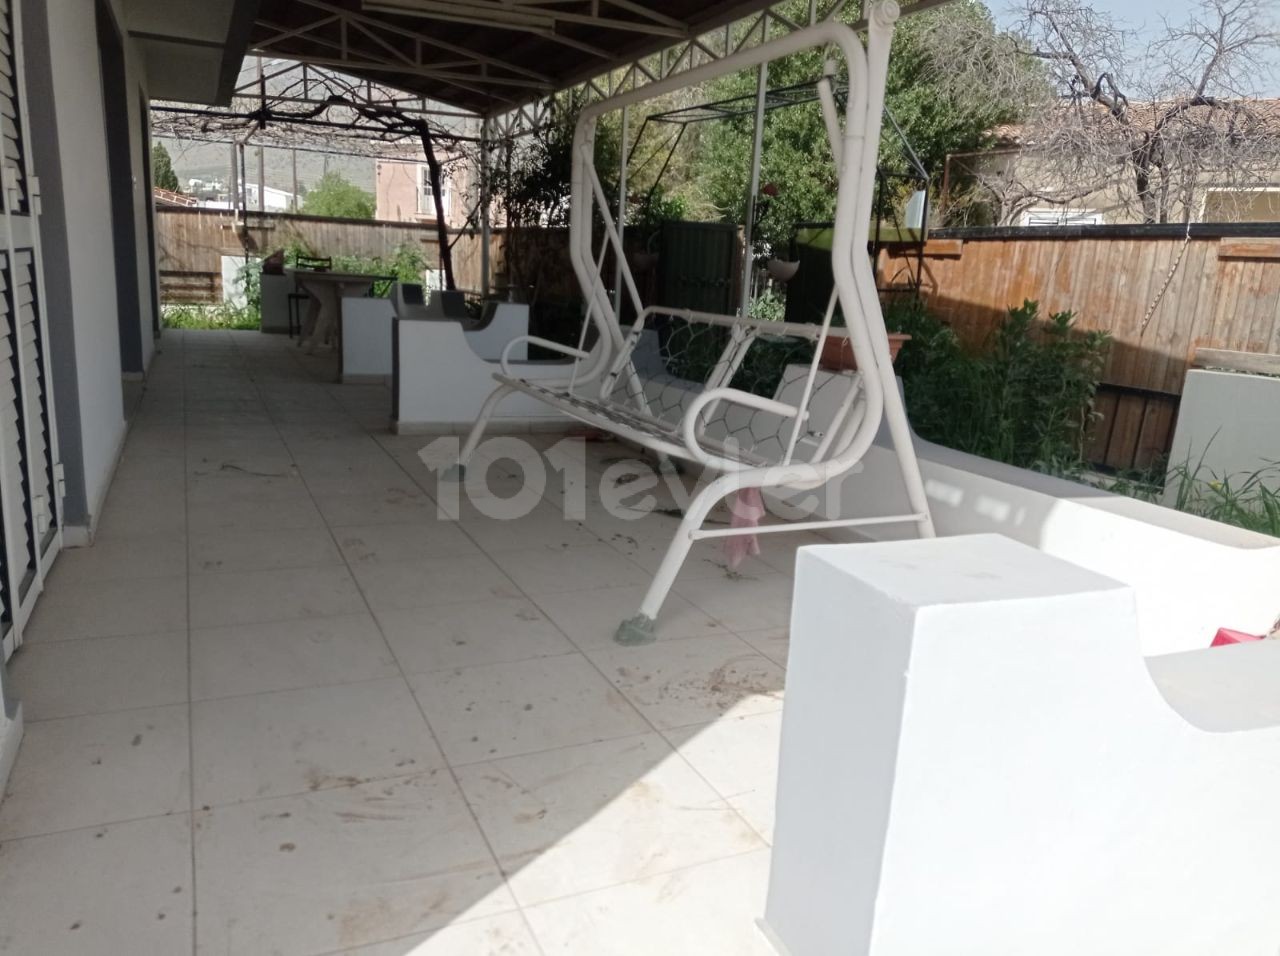 EXCELLENT 135 M2 (3+1) FULLY RENOVATED DETACHED HOUSE WITH GARDEN WITH MOUNTAIN AND NATURE VIEWS IN DIKMEN ** 